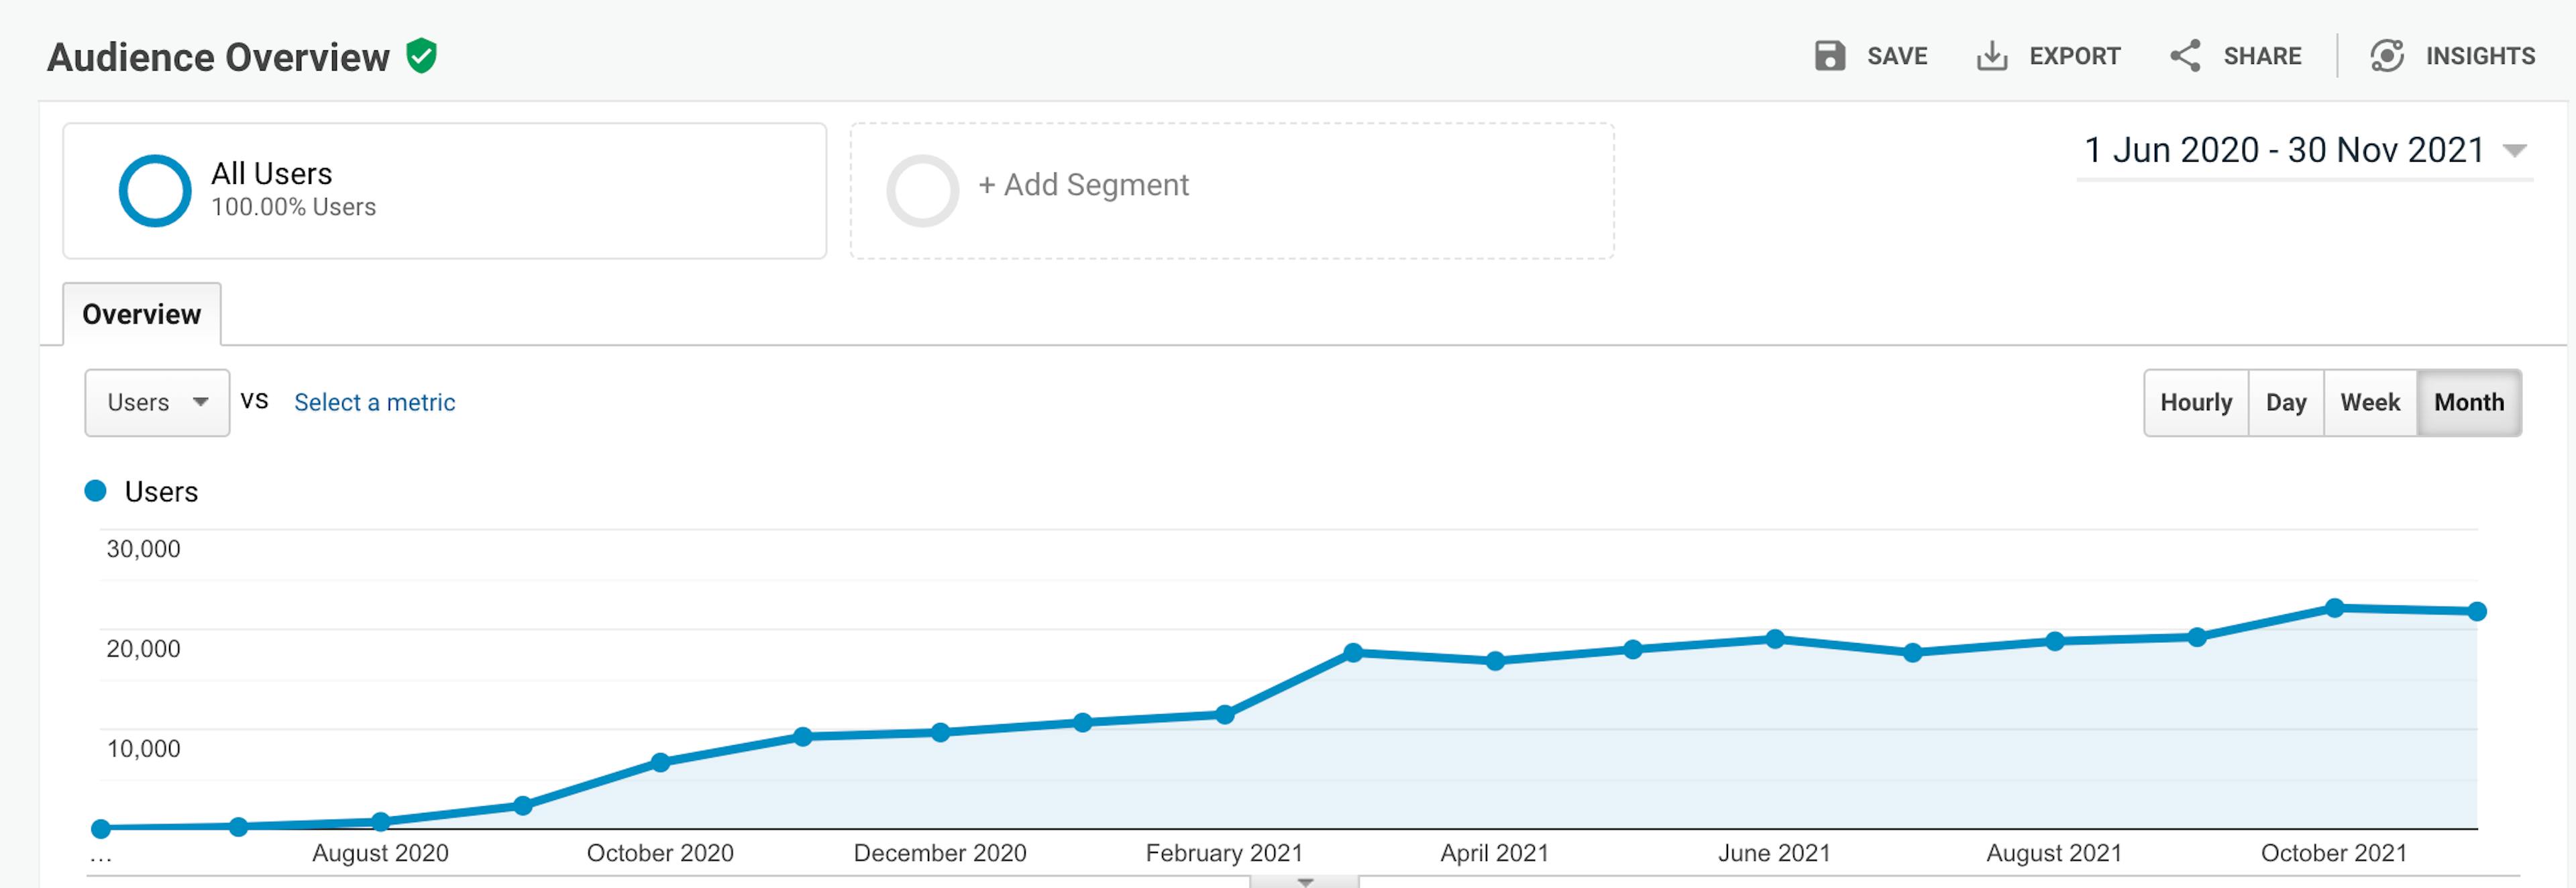 Website traffic from launch